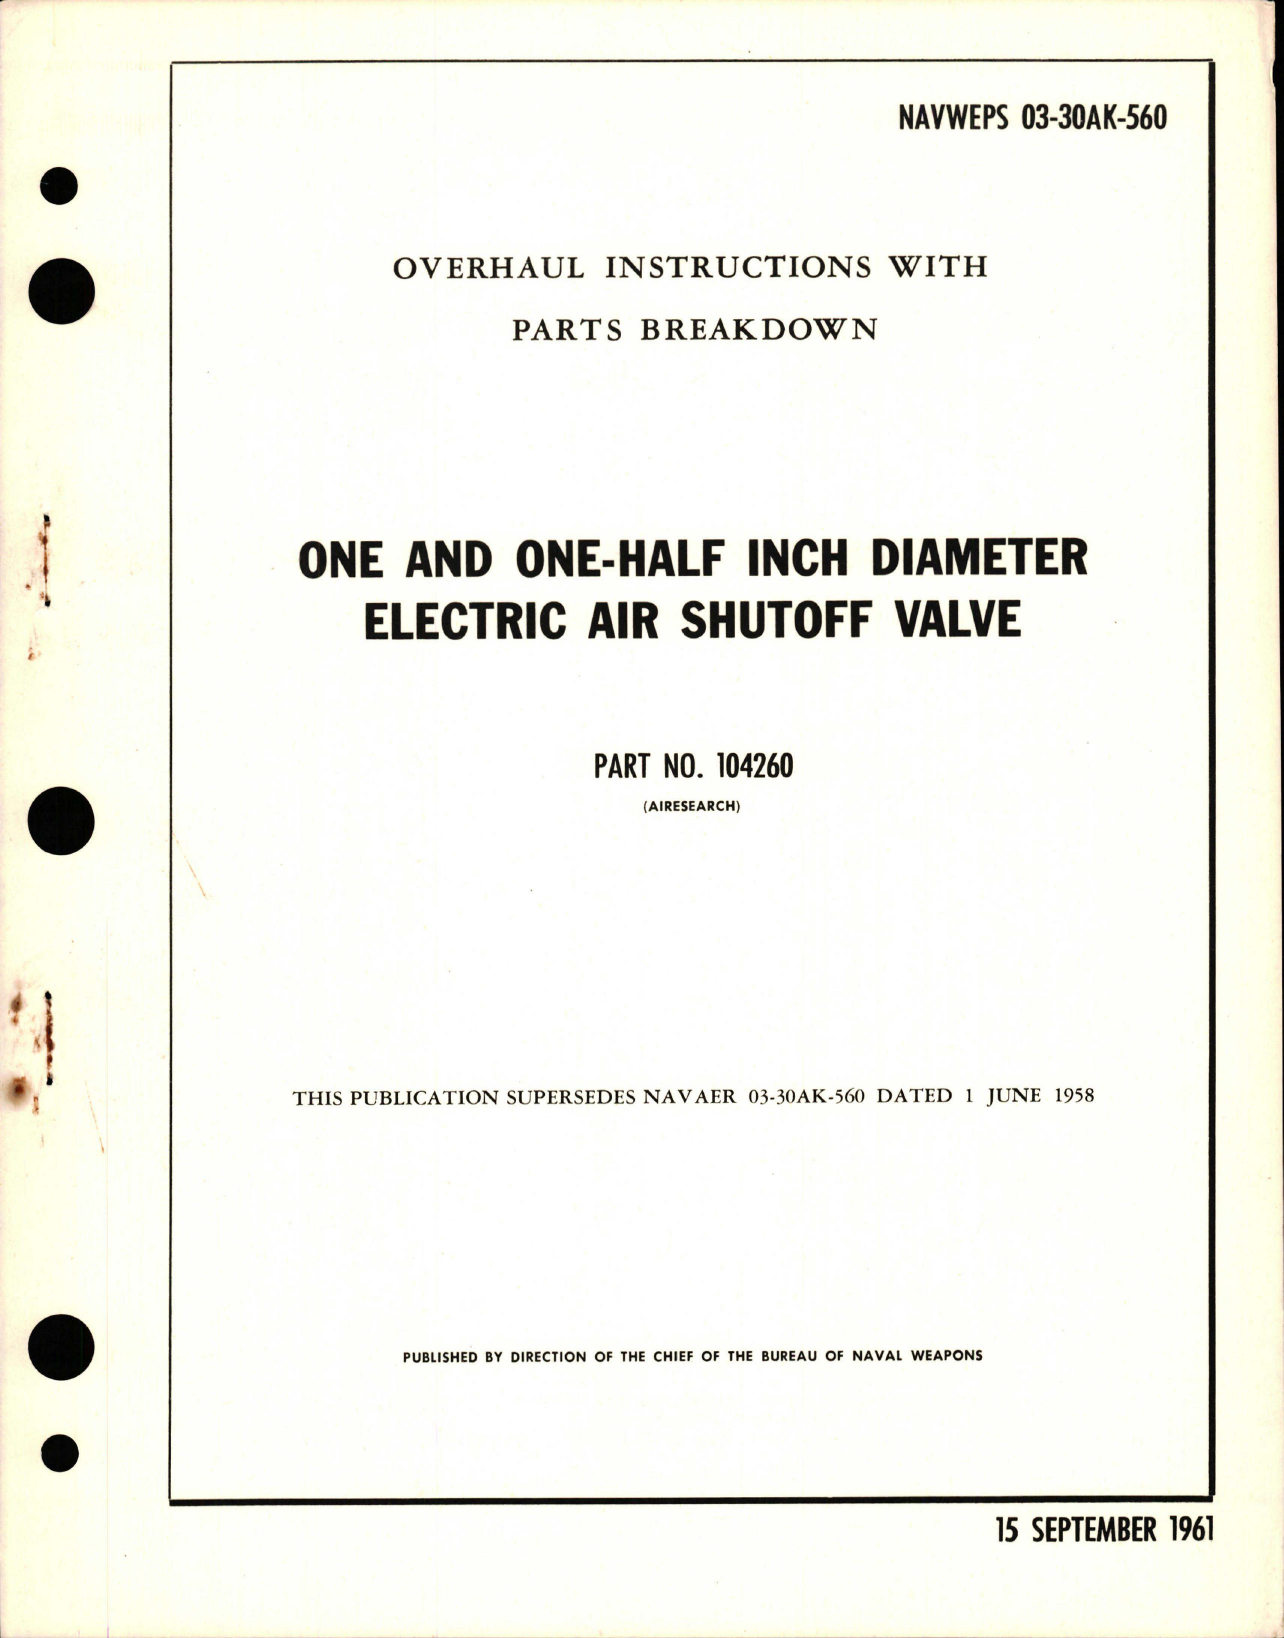 Sample page 1 from AirCorps Library document: Overhaul Instructions with Parts Breakdown for 1 1/2